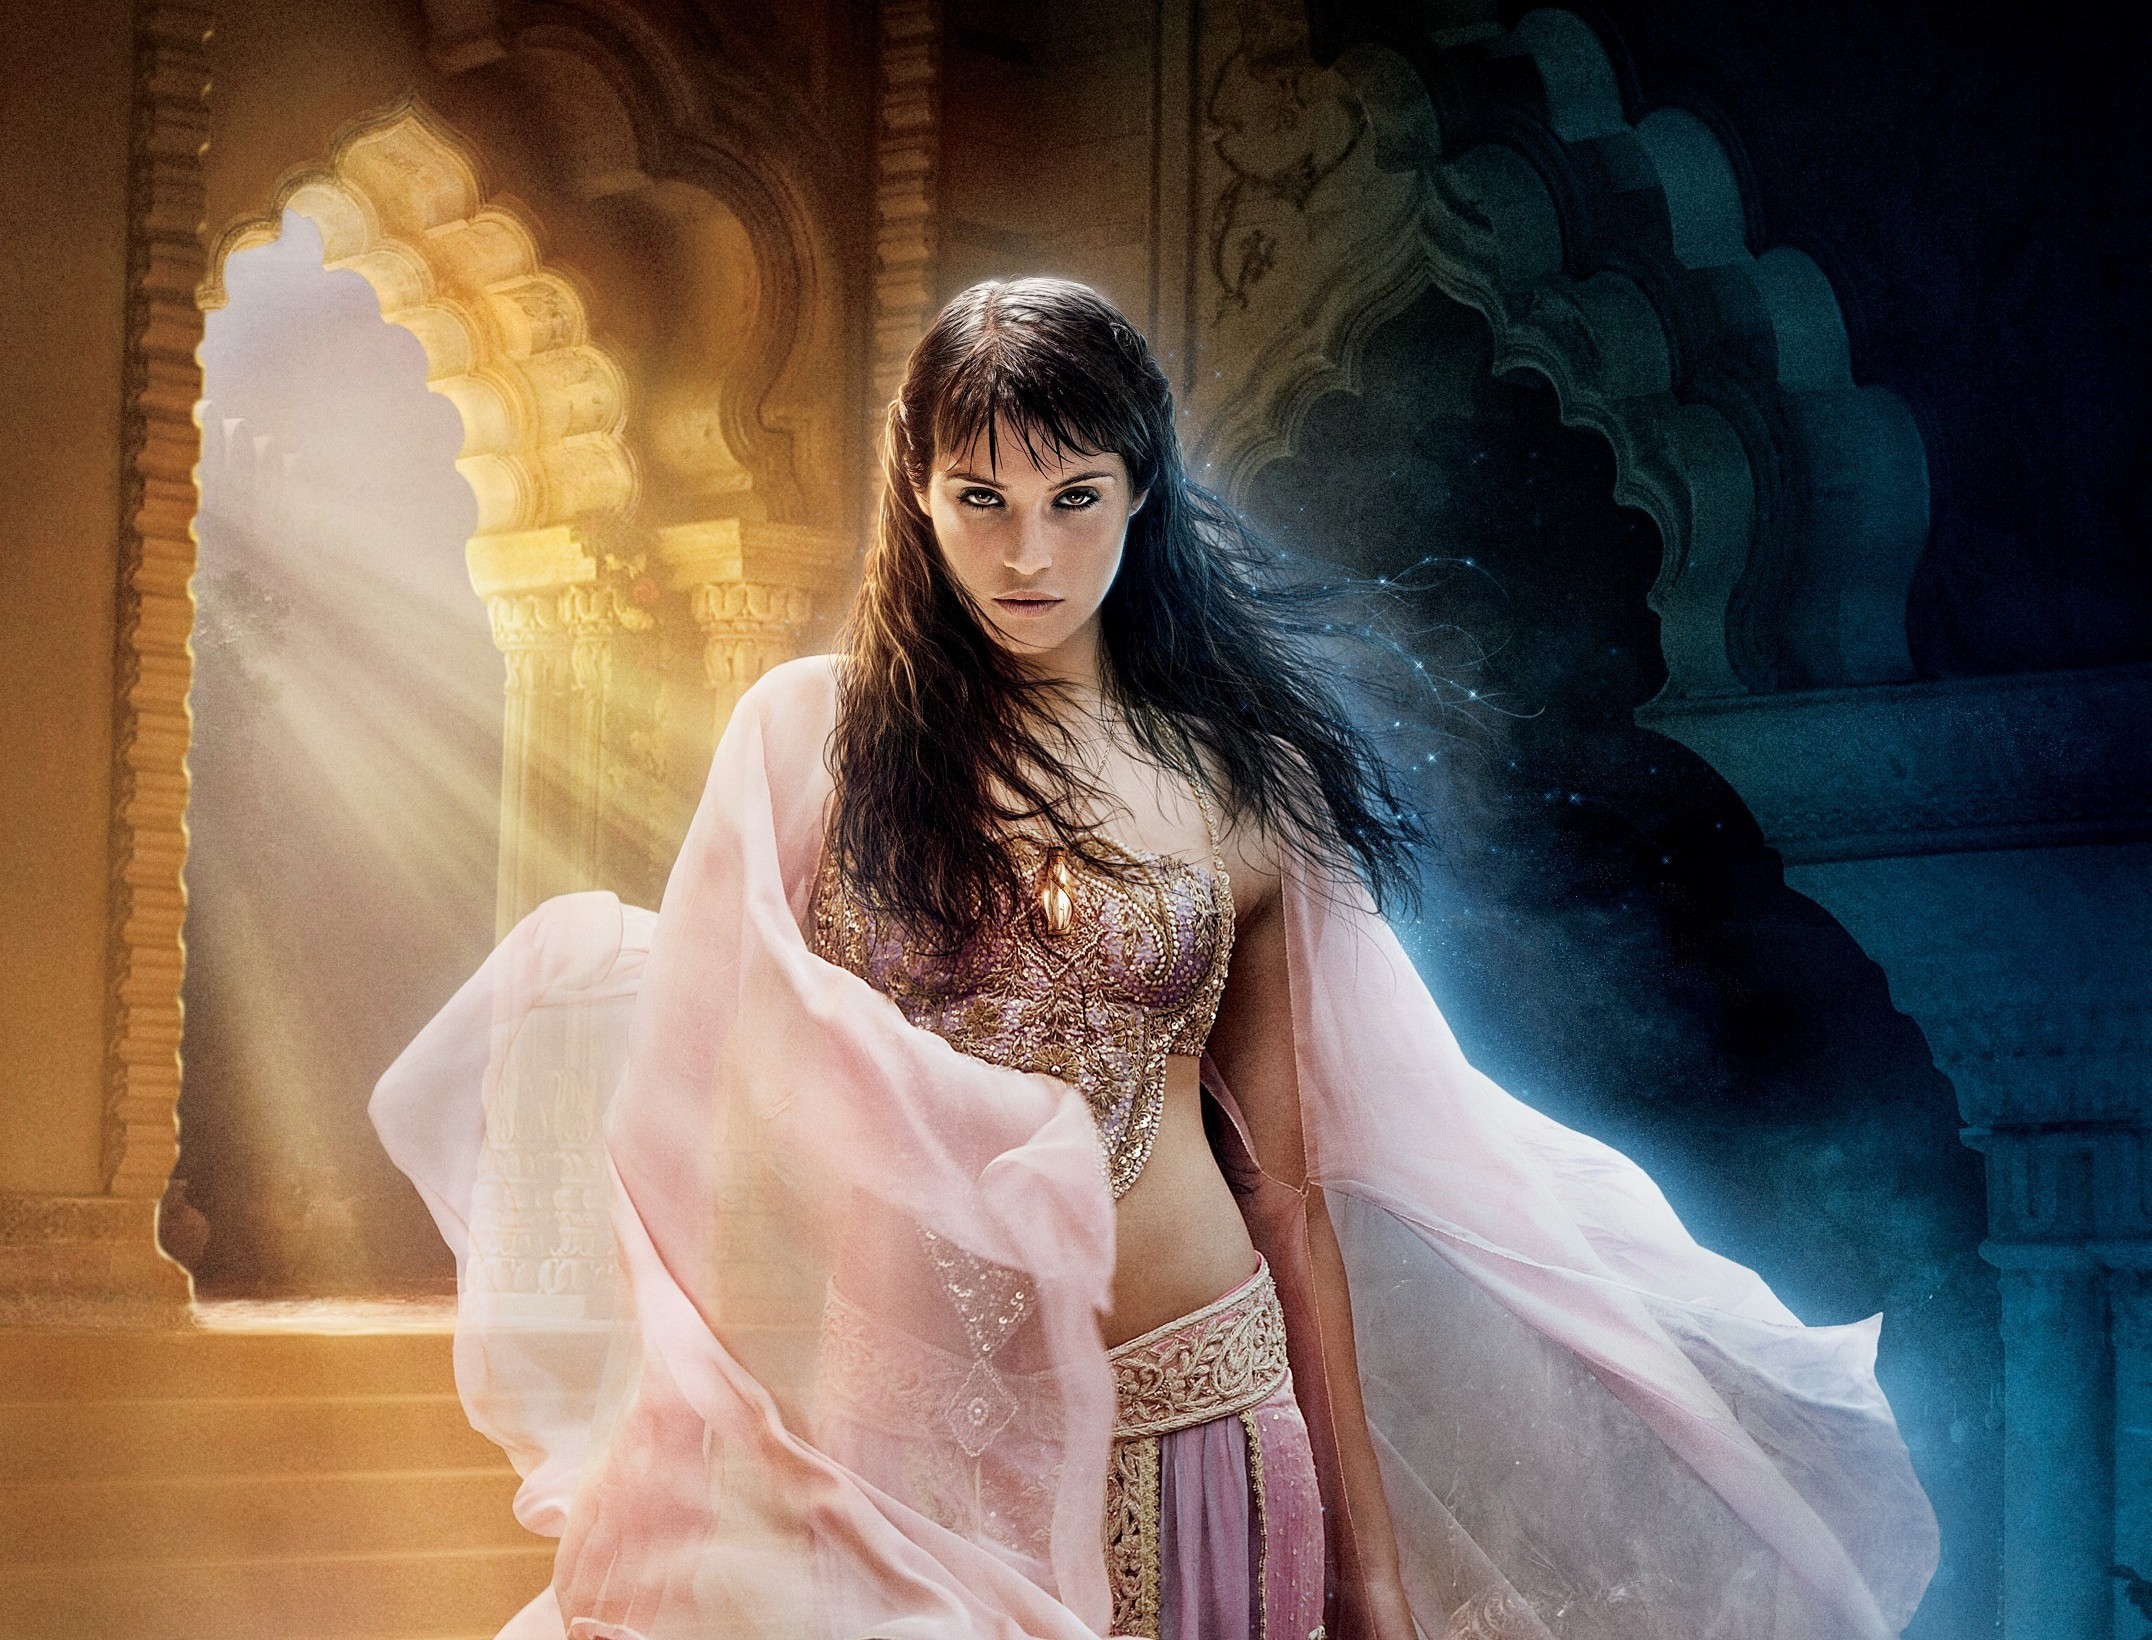 gemma arterton, prince of persia, movie, prince of persia: the sands of time 32K